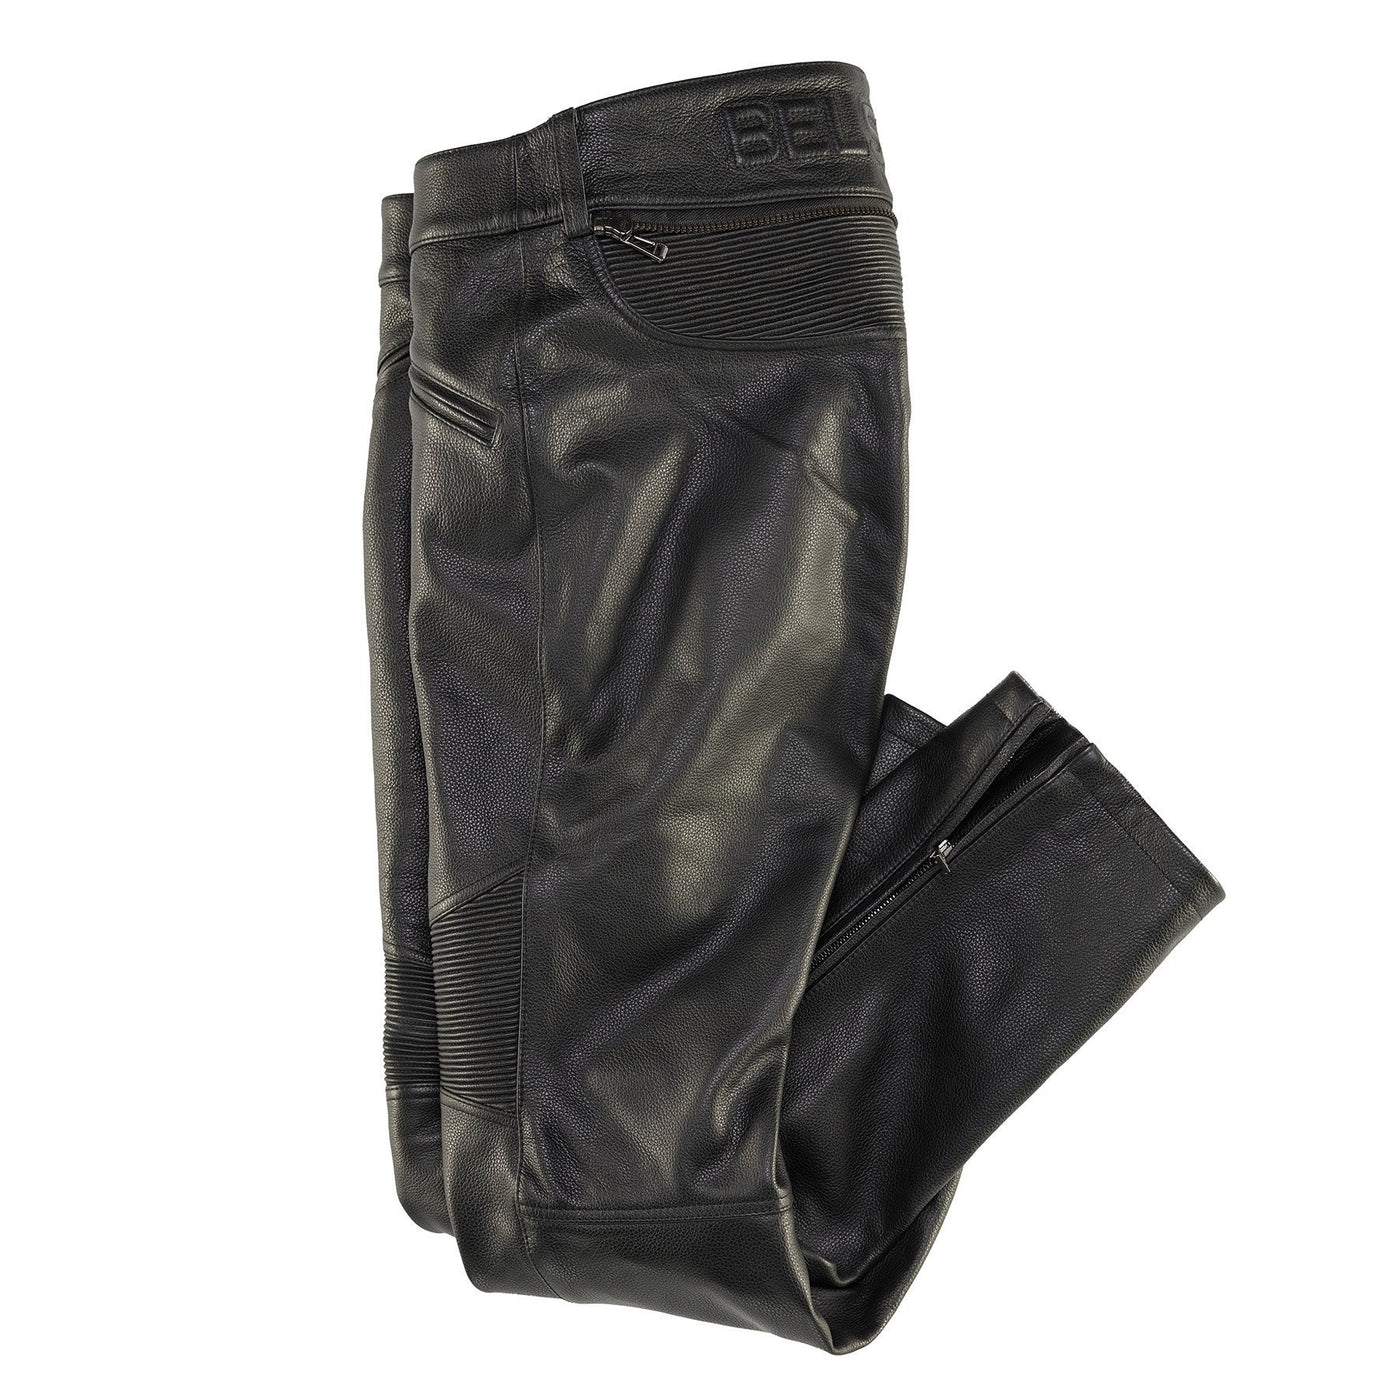 Belstaff Long Way Up McGregor leather trousers